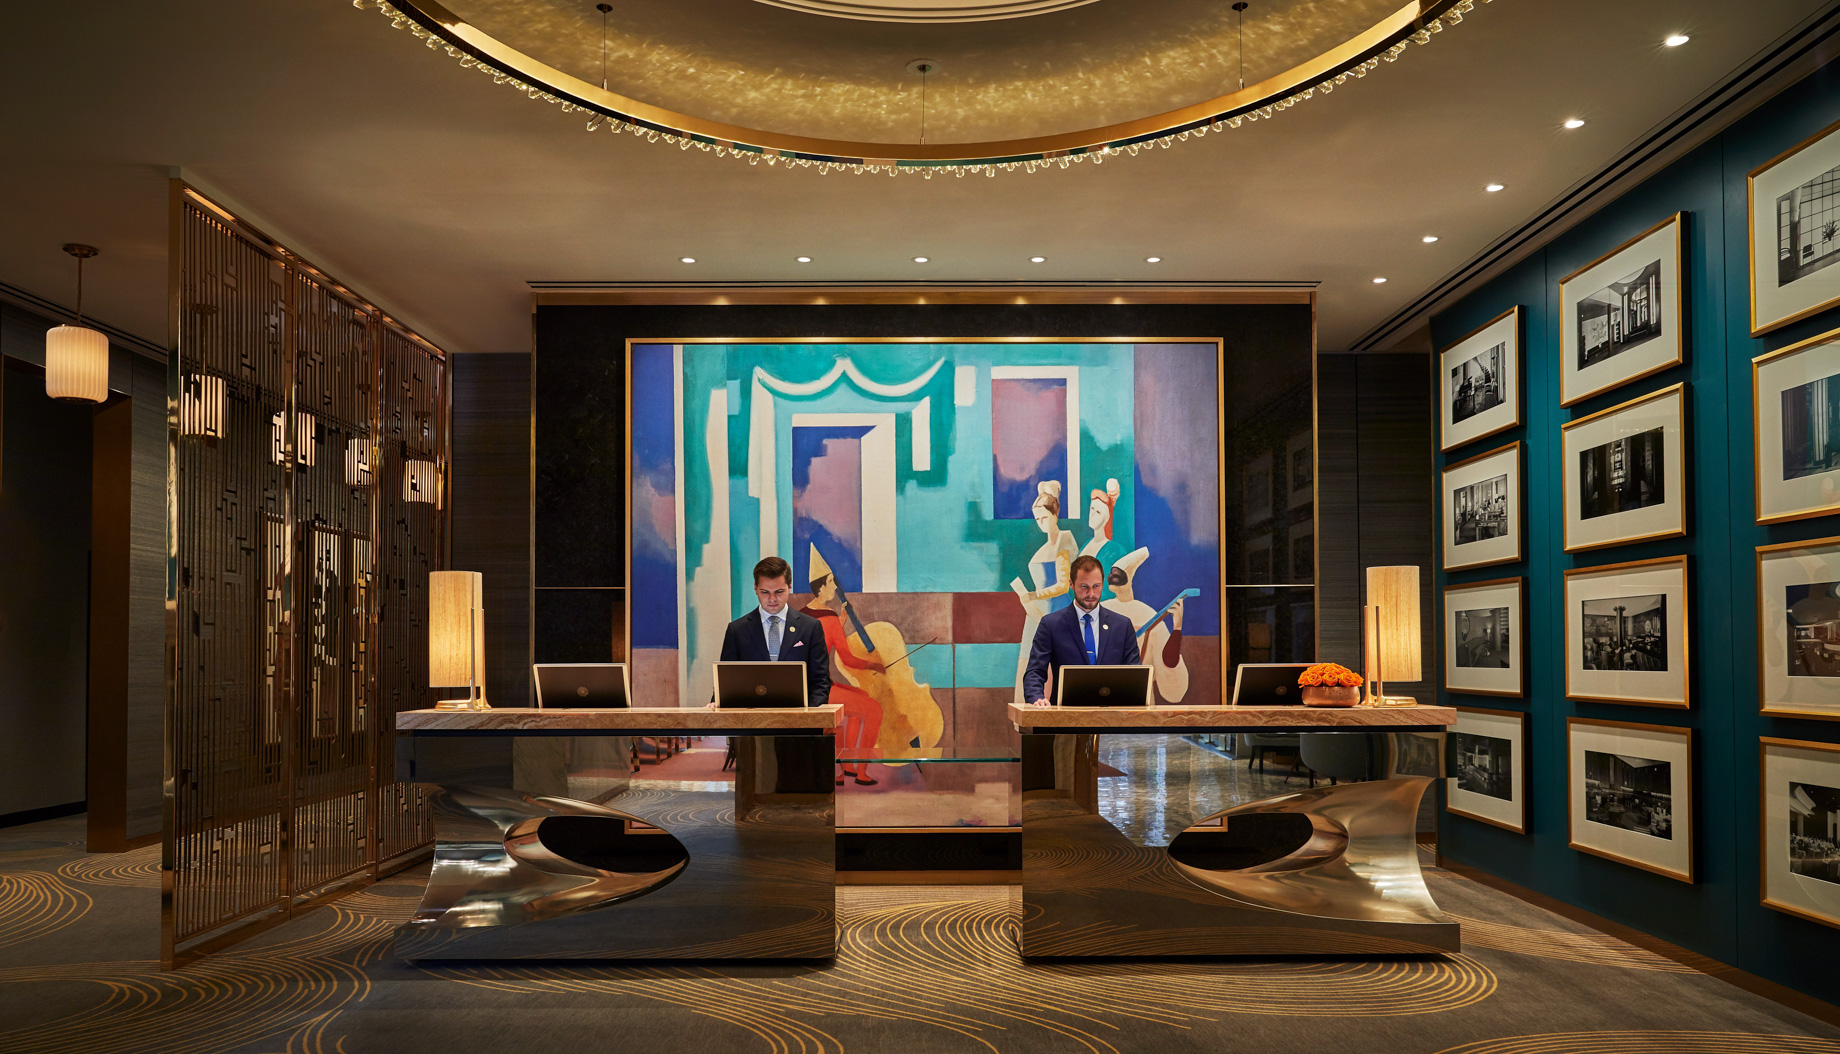 Viceroy Chicago Hotel – Chicago, IL, USA – Lobby Reception